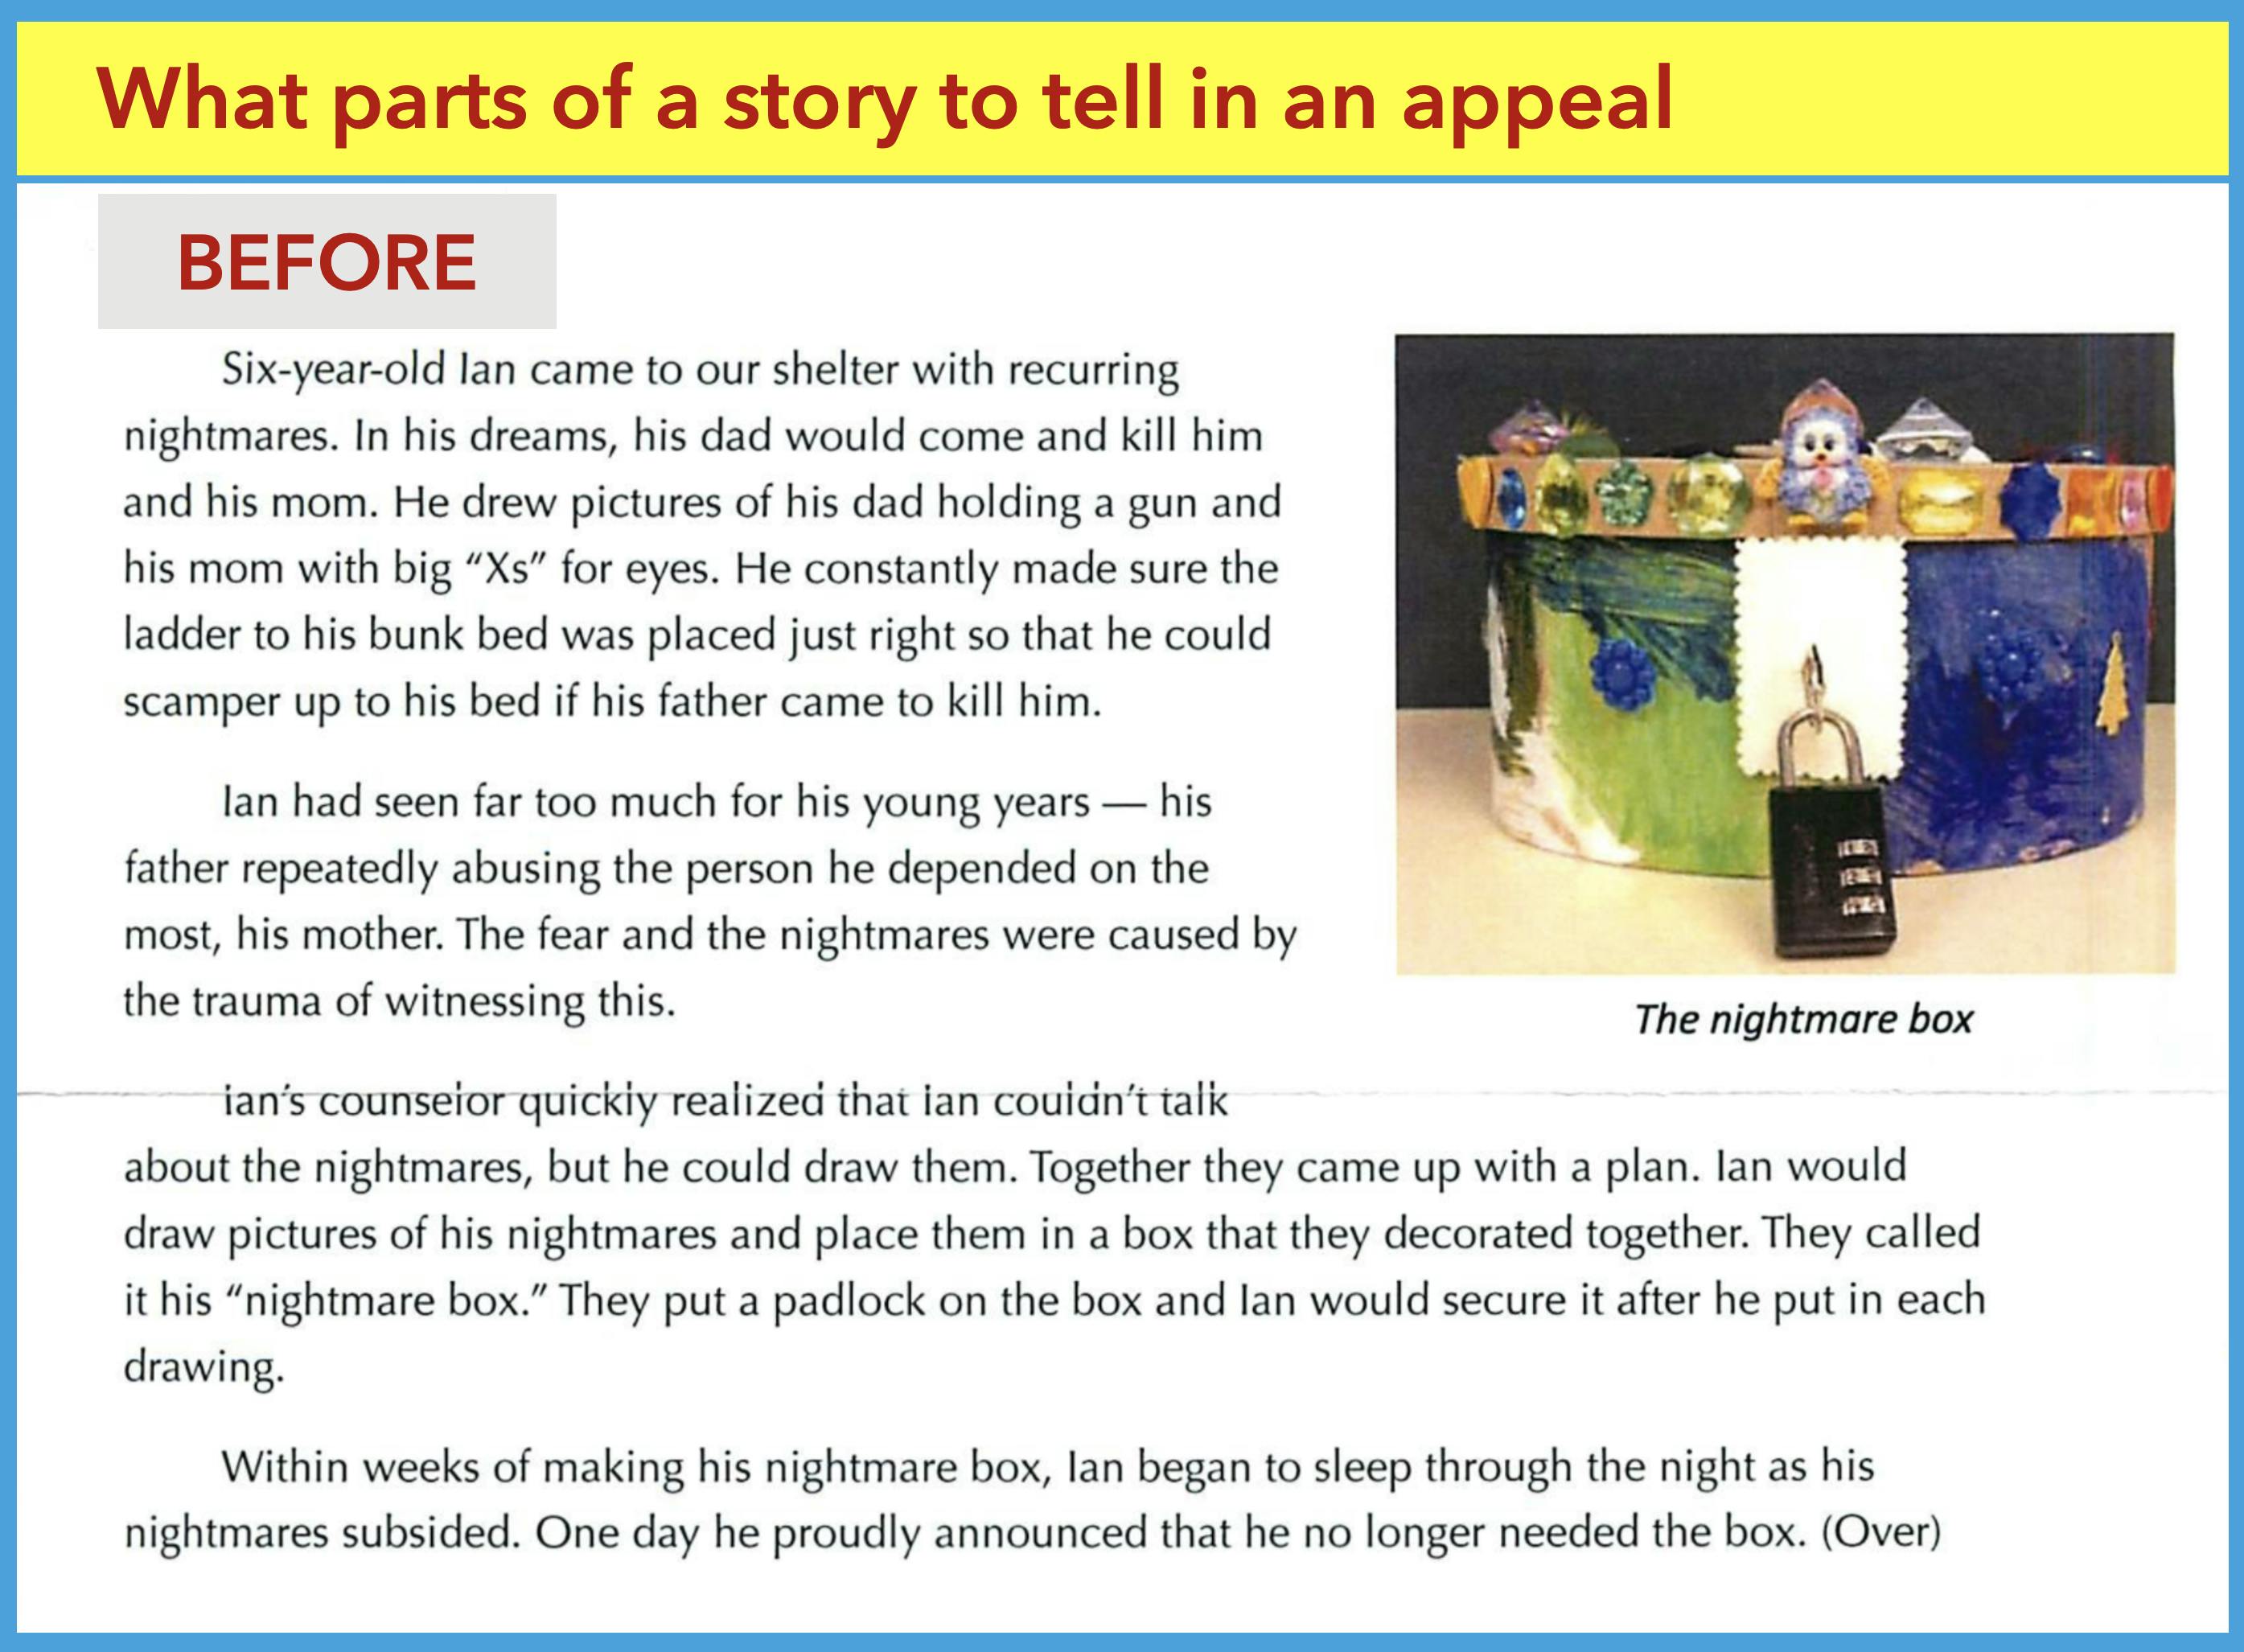 Screenshot showing the first page of an appeal letter story about a boy named Ian who uses a nightmare box in therapy to help him deal with the trauma of abuse.